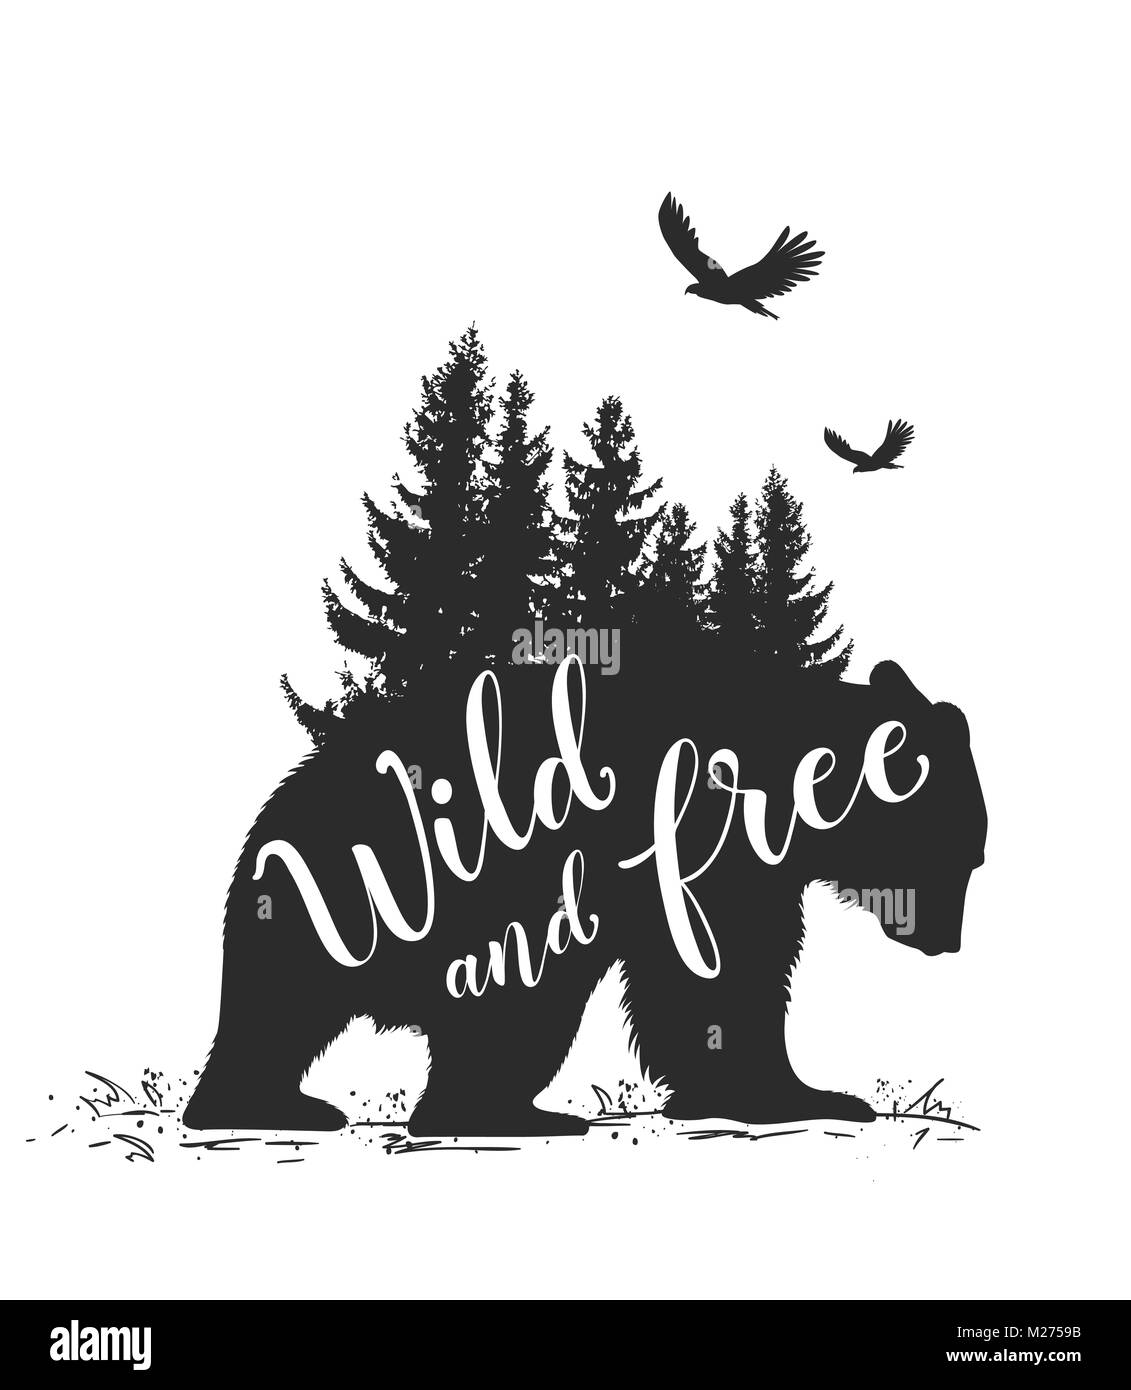 Silhouette of a wild bear, fir tree and calligraphy. Wild life in nature. Stock Photo